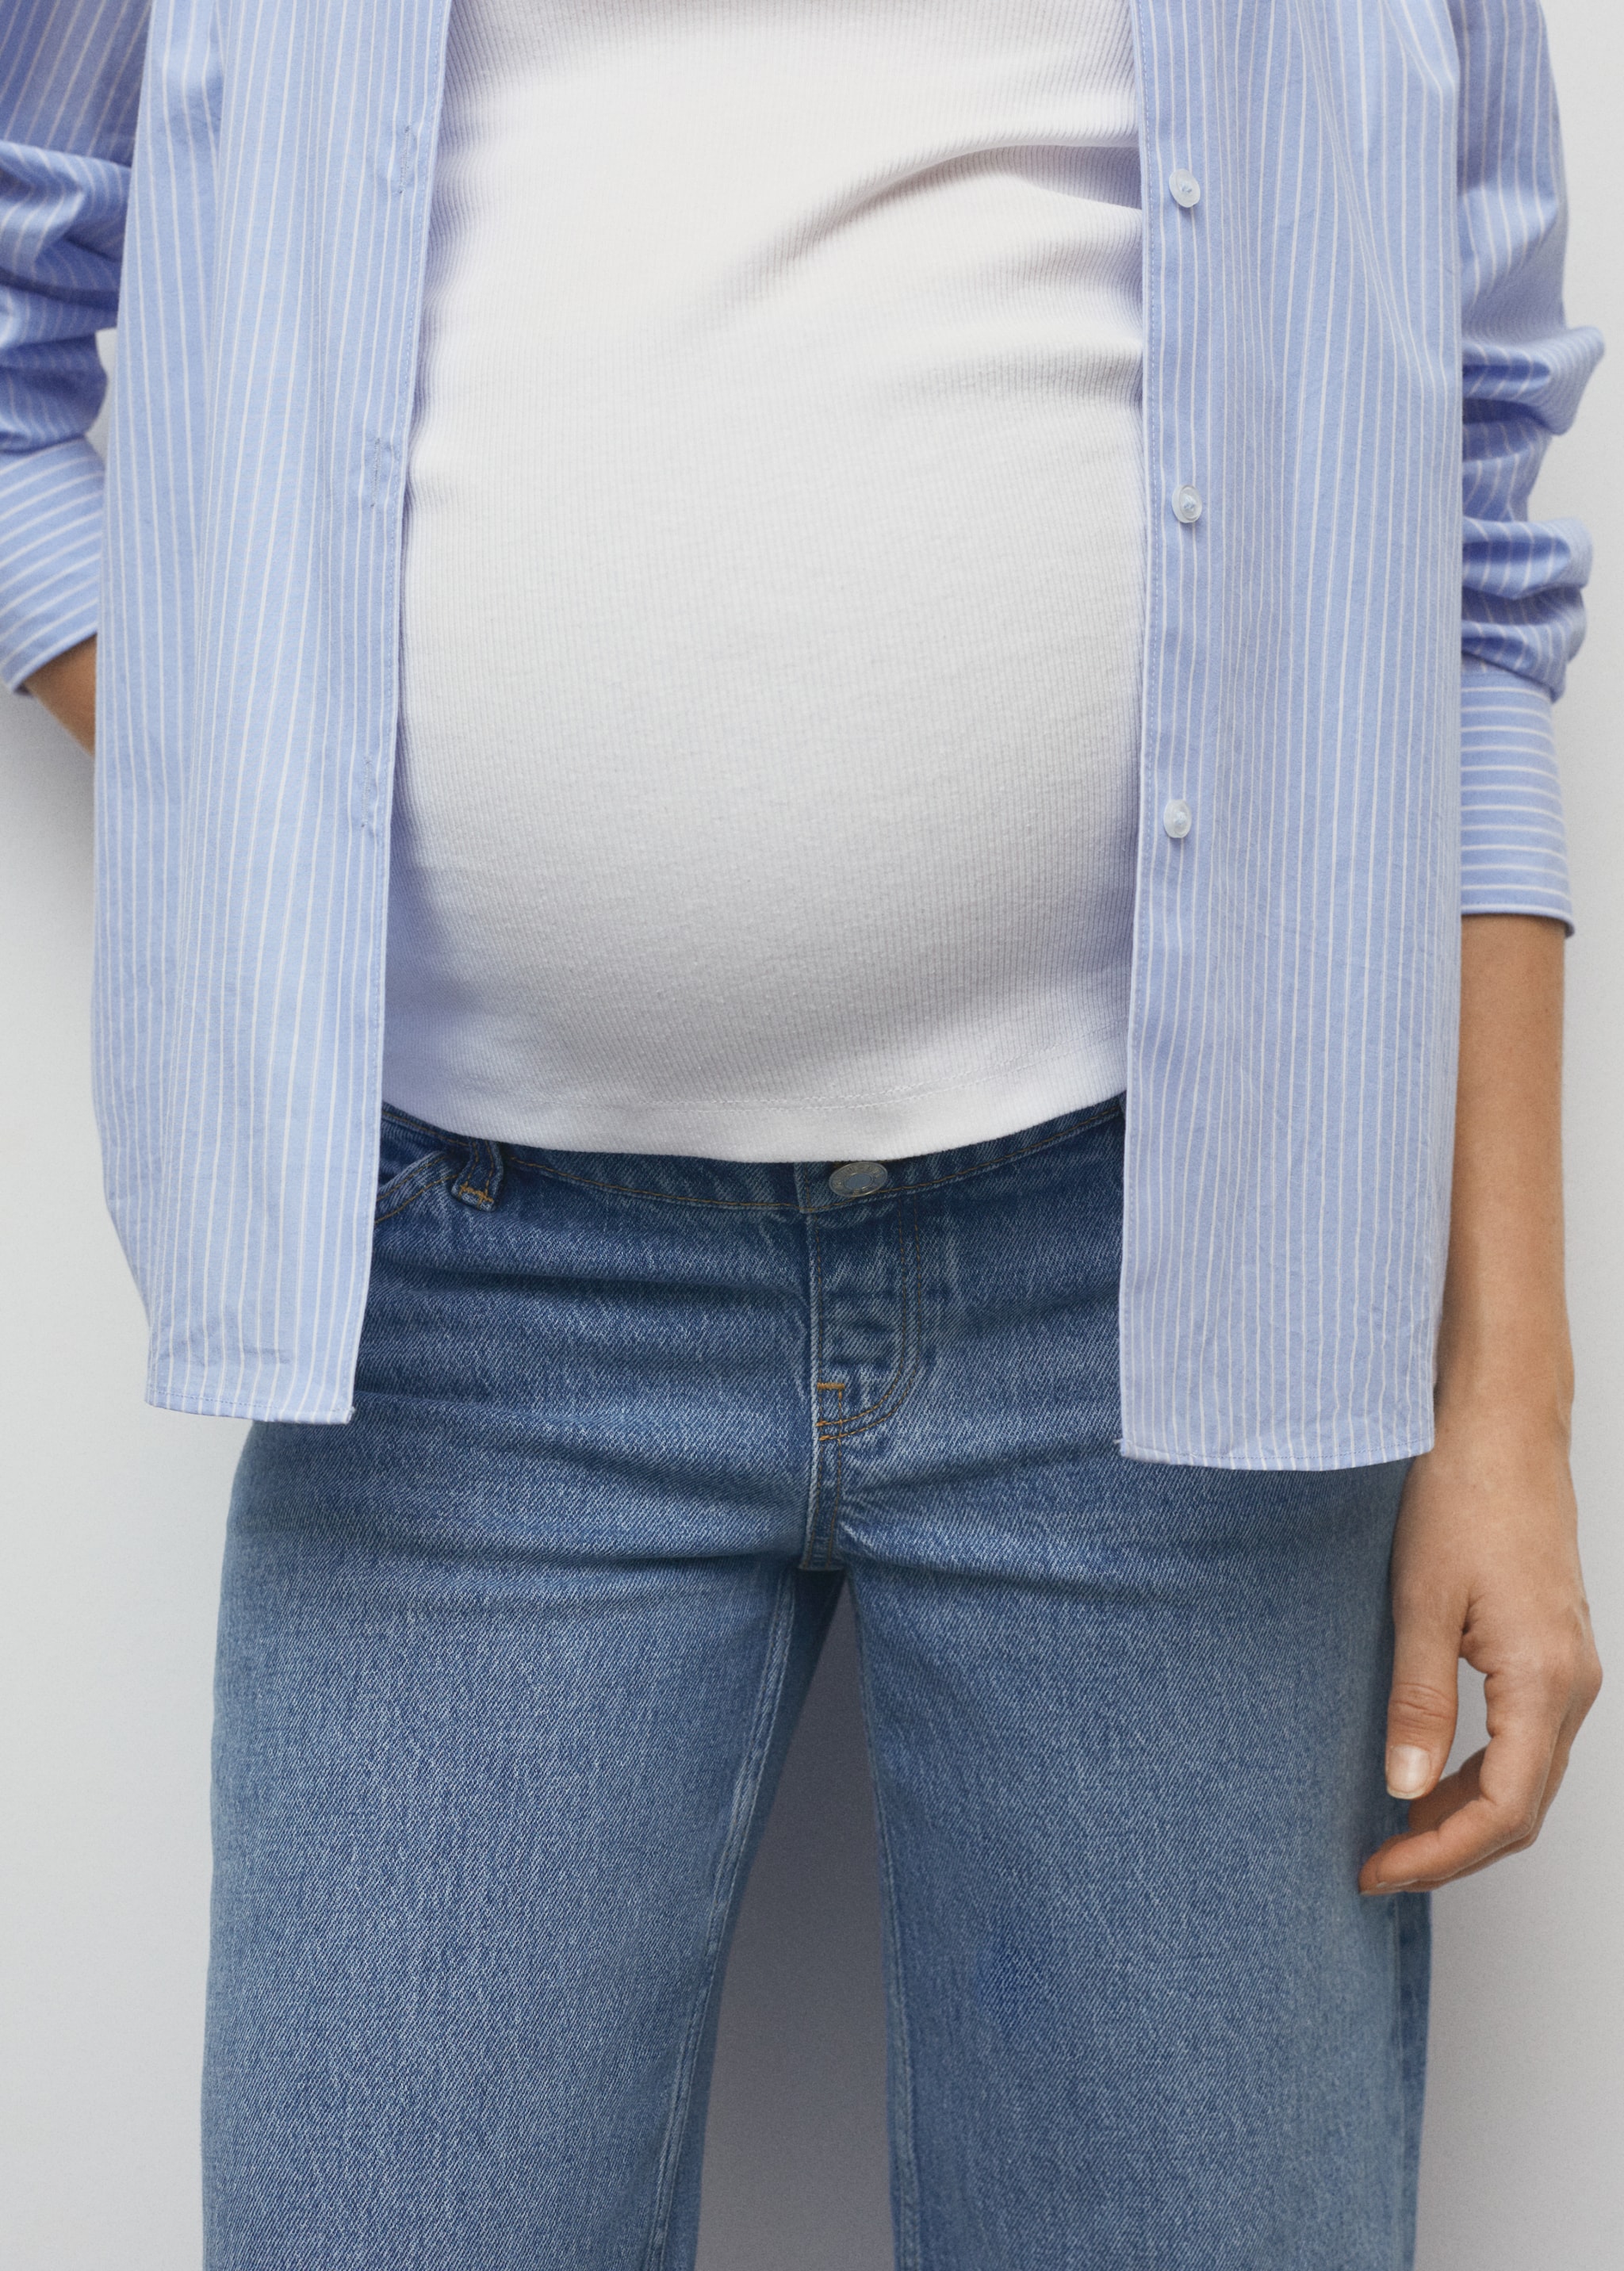 Maternity wideleg jeans - Details of the article 6